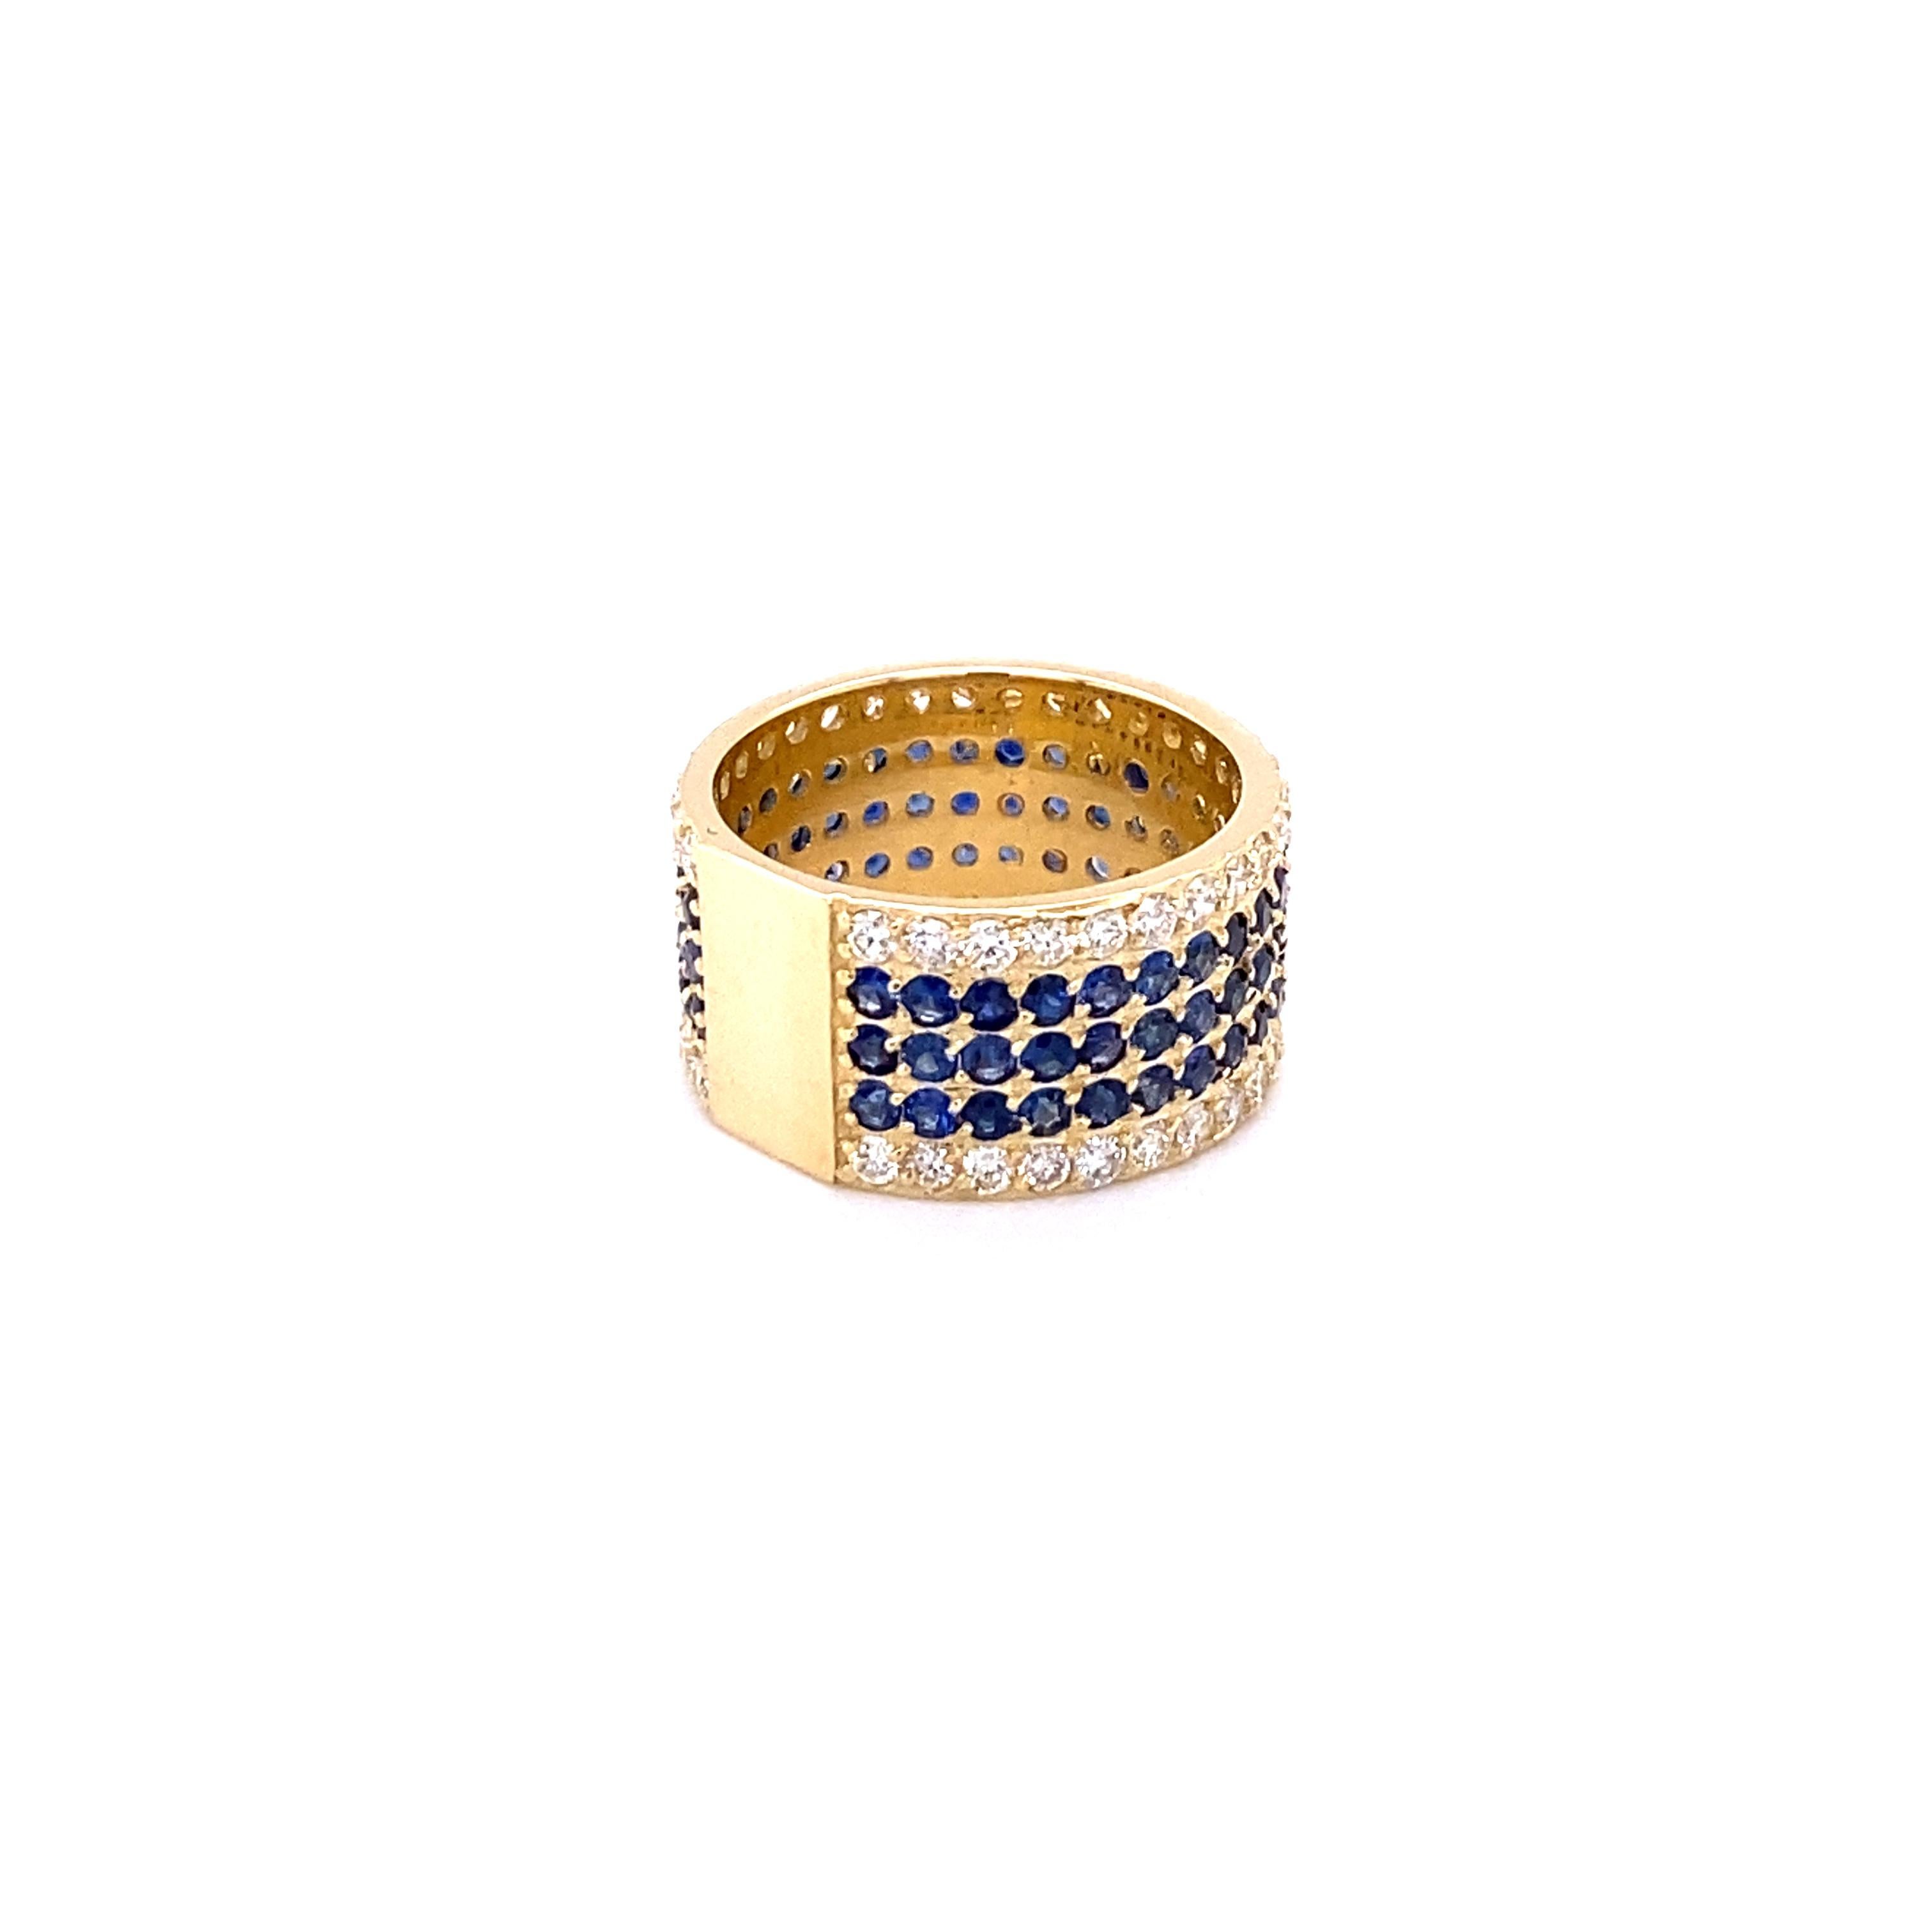 This ring has 90 Blue Sapphires that weigh 2.90 Carats and 60 Round Cut Diamonds that weigh 1.48 Carats. The clarity and color of the diamonds are VS-H. The total carat weight of the ring is 4.38 Carats. 

Crafted in 14 Karat Yellow Gold and is